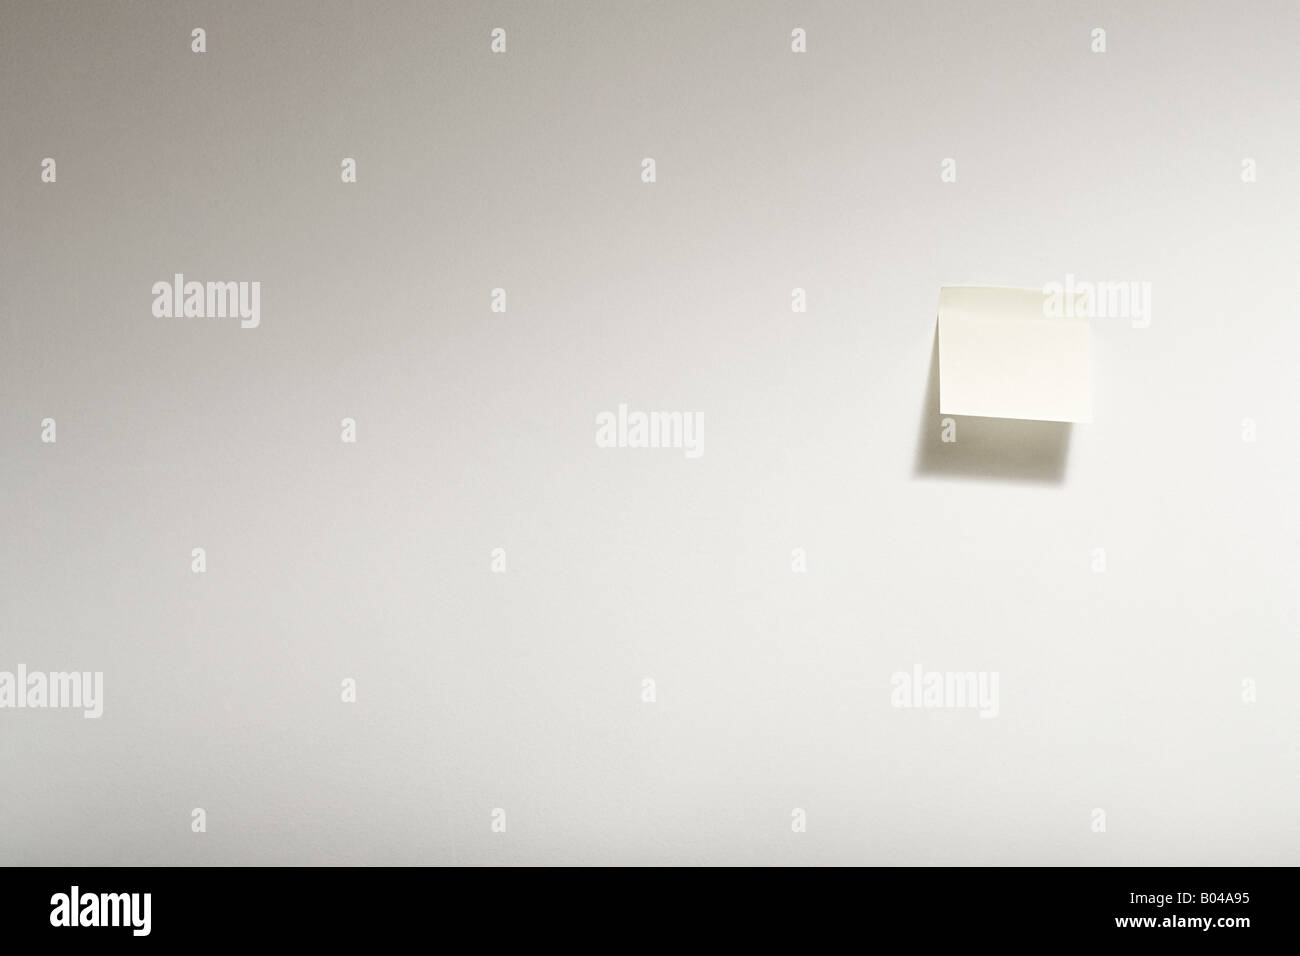 Adhesive note on wall Stock Photo